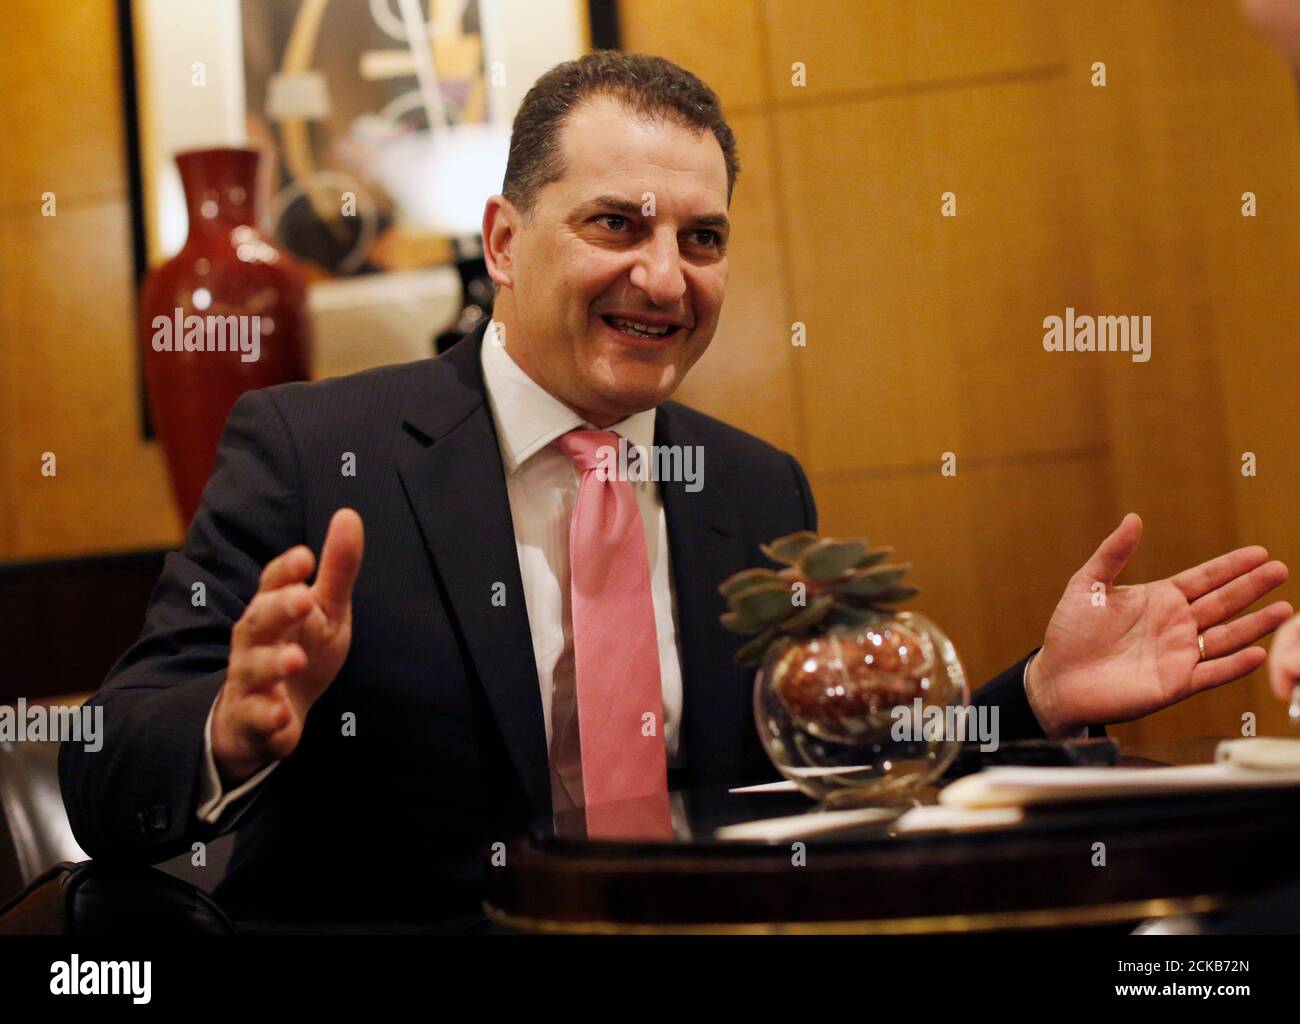 Yiorgos Lakkotrypis, Cyprus' Minister of Energy, Commerce, Industry and Tourism, speaks during an interview in New York March 11, 2015.  REUTERS/Shannon Stapleton (UNITED STATES - Tags: POLITICS ENERGY) Stock Photo